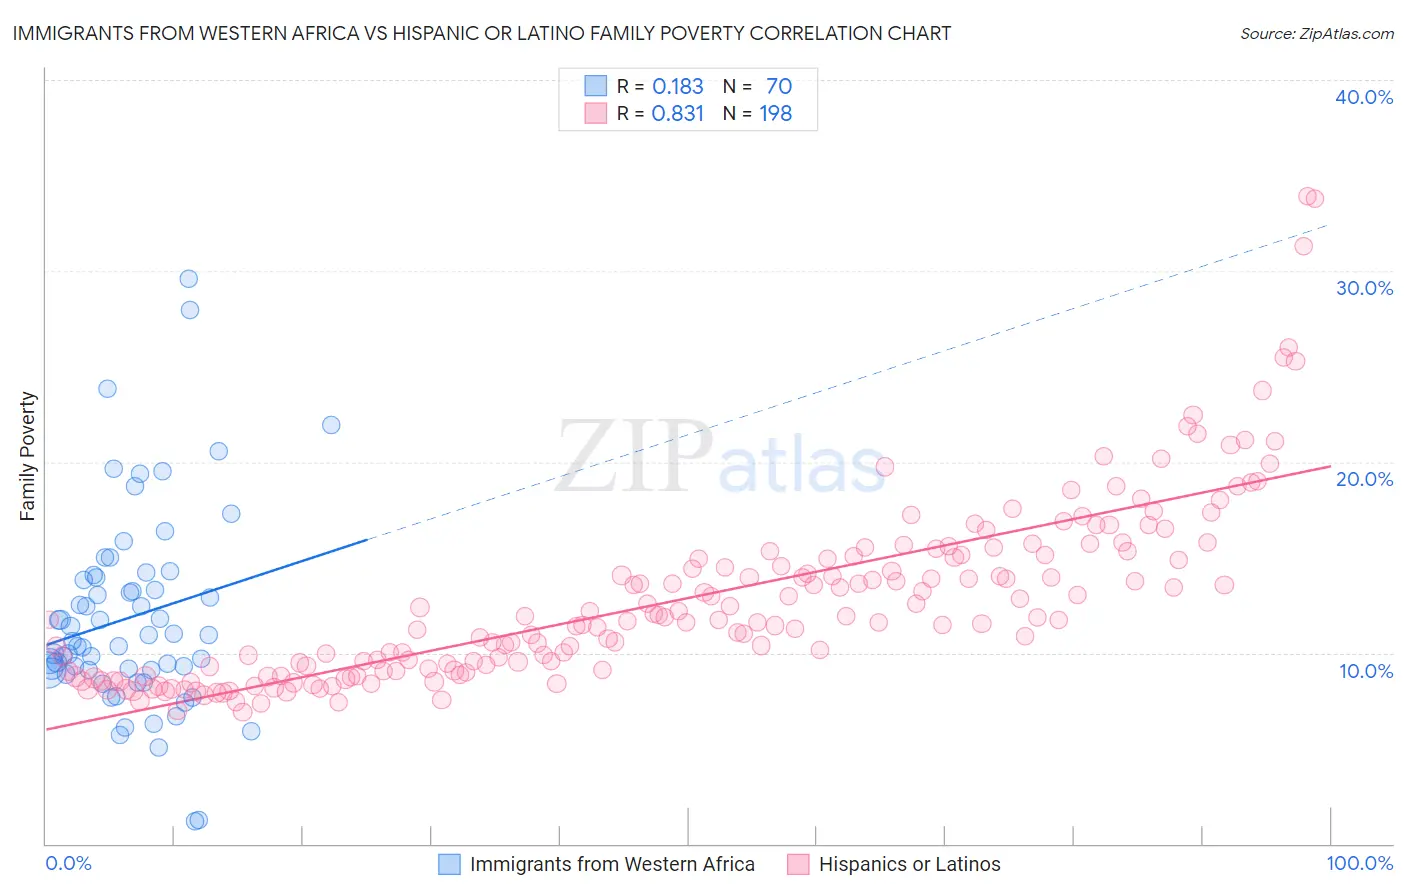 Immigrants from Western Africa vs Hispanic or Latino Family Poverty